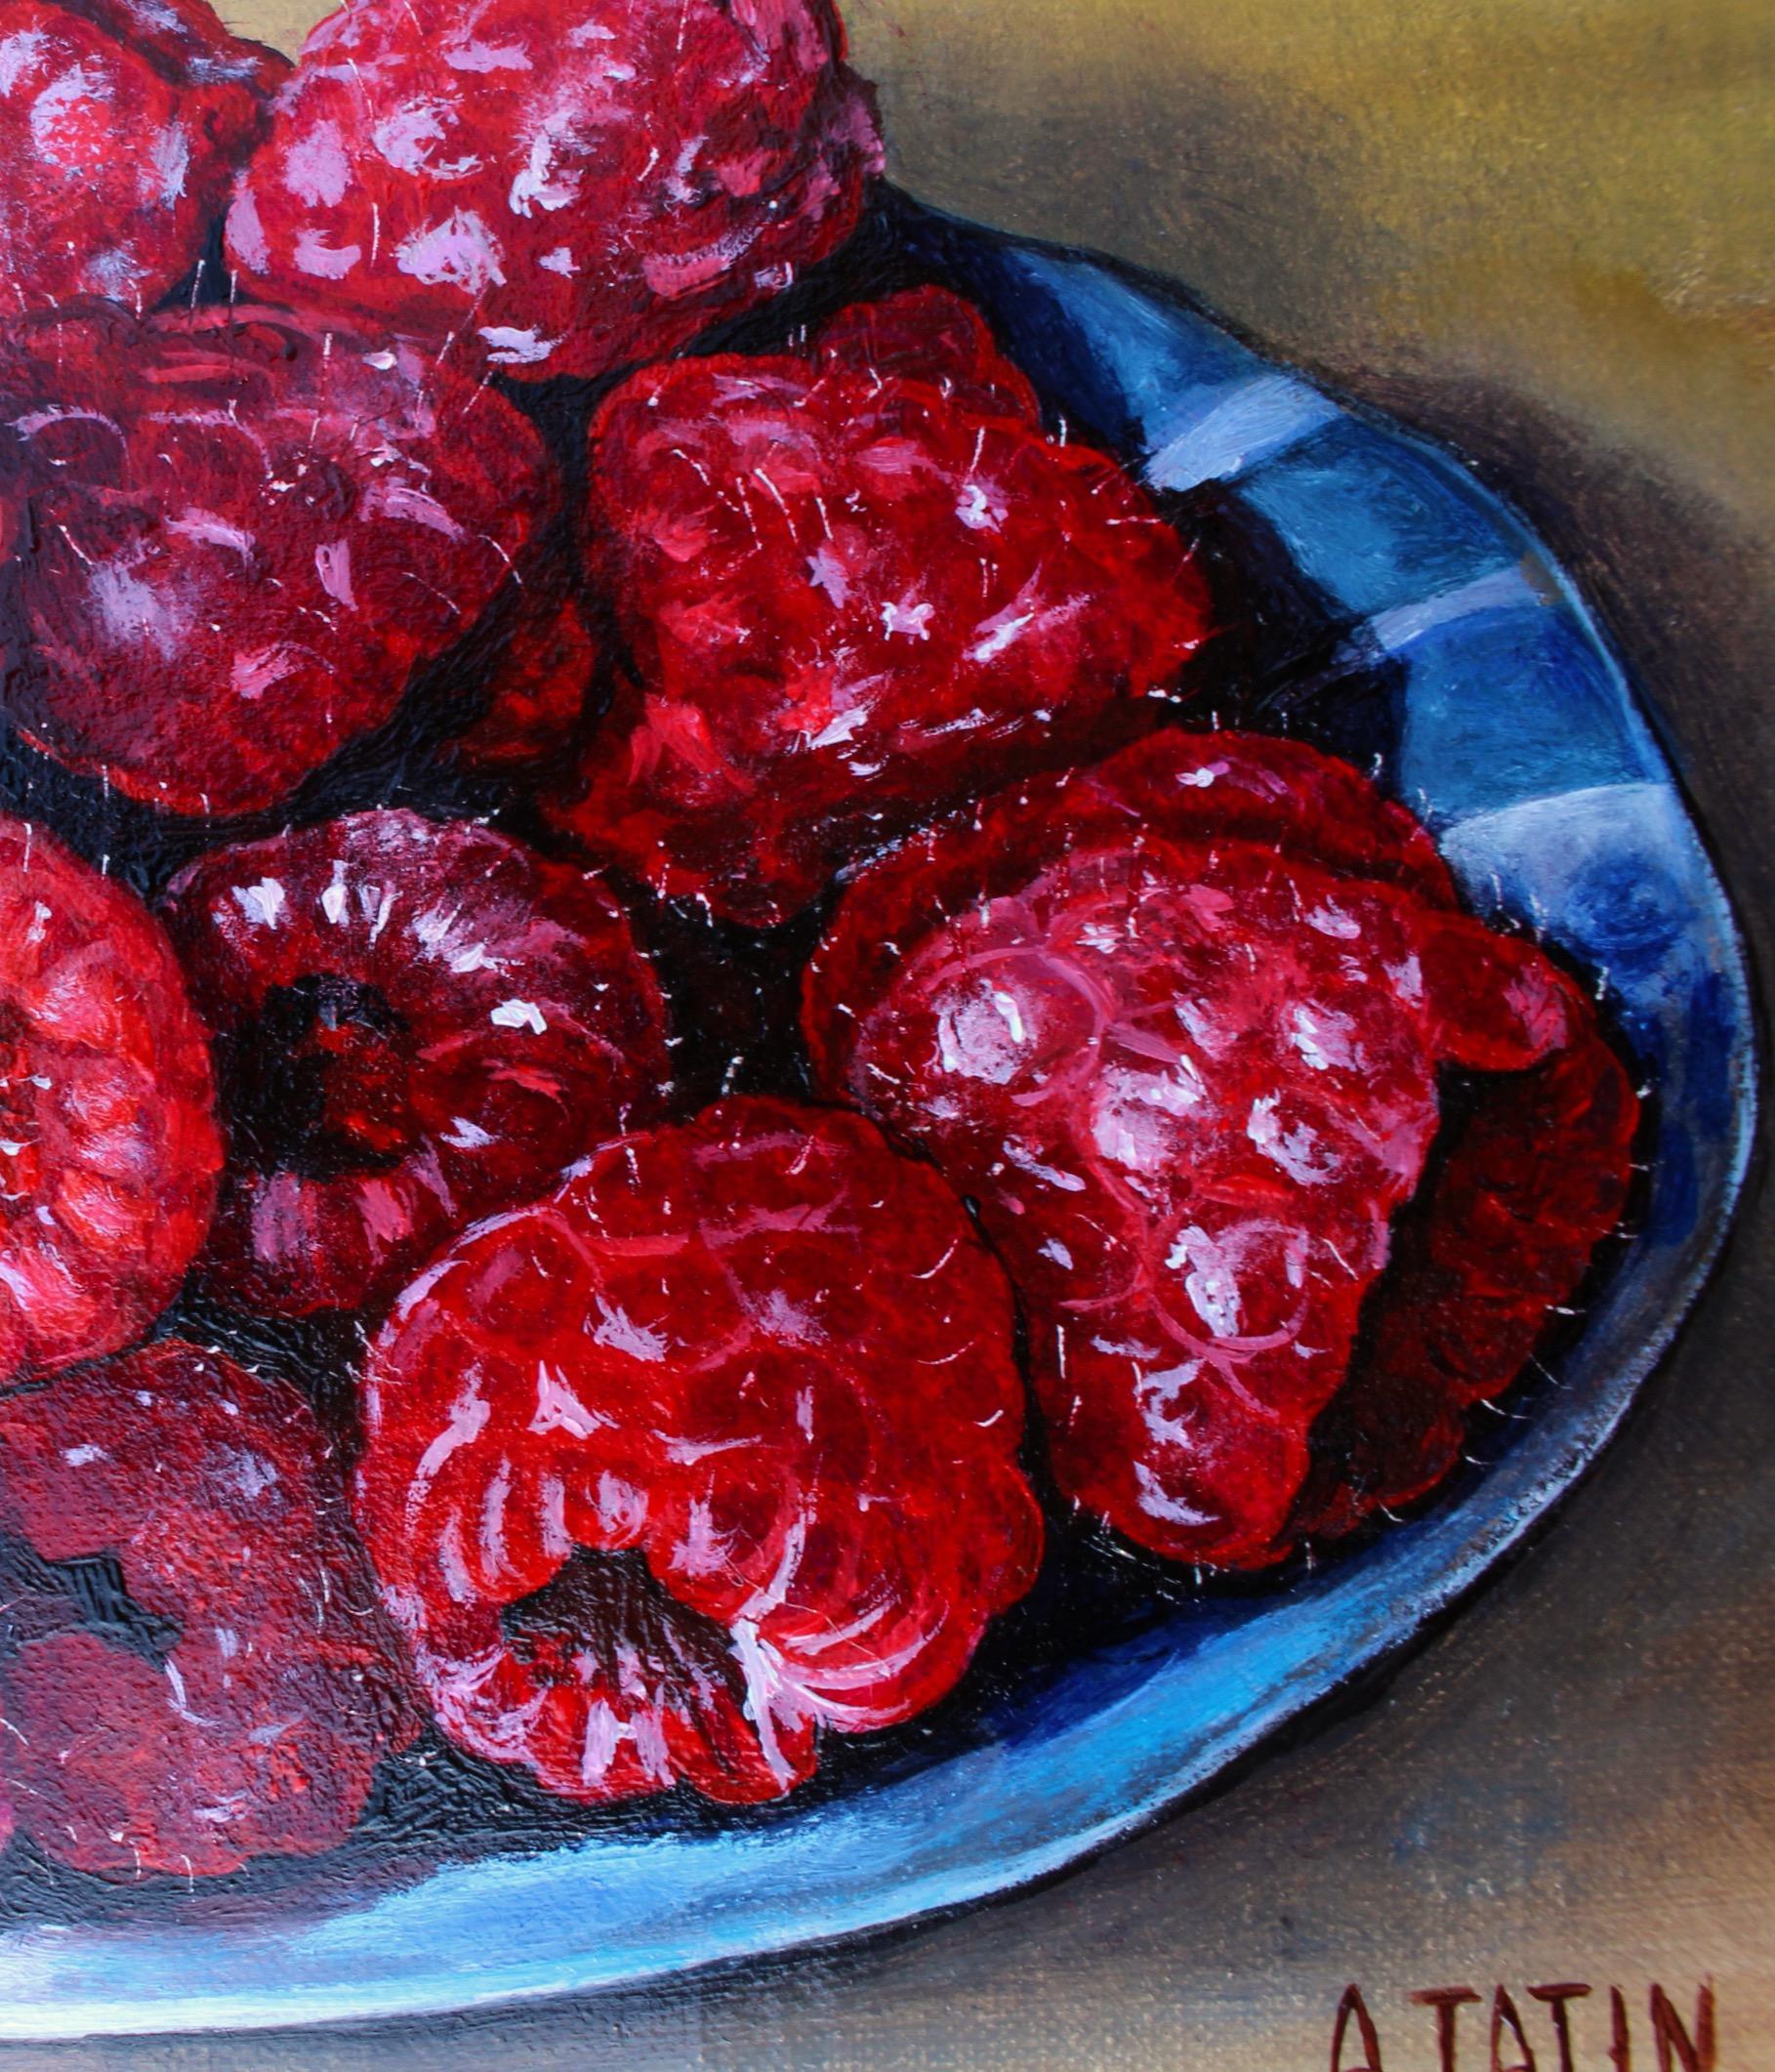 <p>Artist Comments<br>Fresh red raspberries glisten in a blue and white bowl. The play of light on the drupelets and the subtle shadows at the container's bottom enhances the realism of the artwork. Painted with Flemish techniques, the process